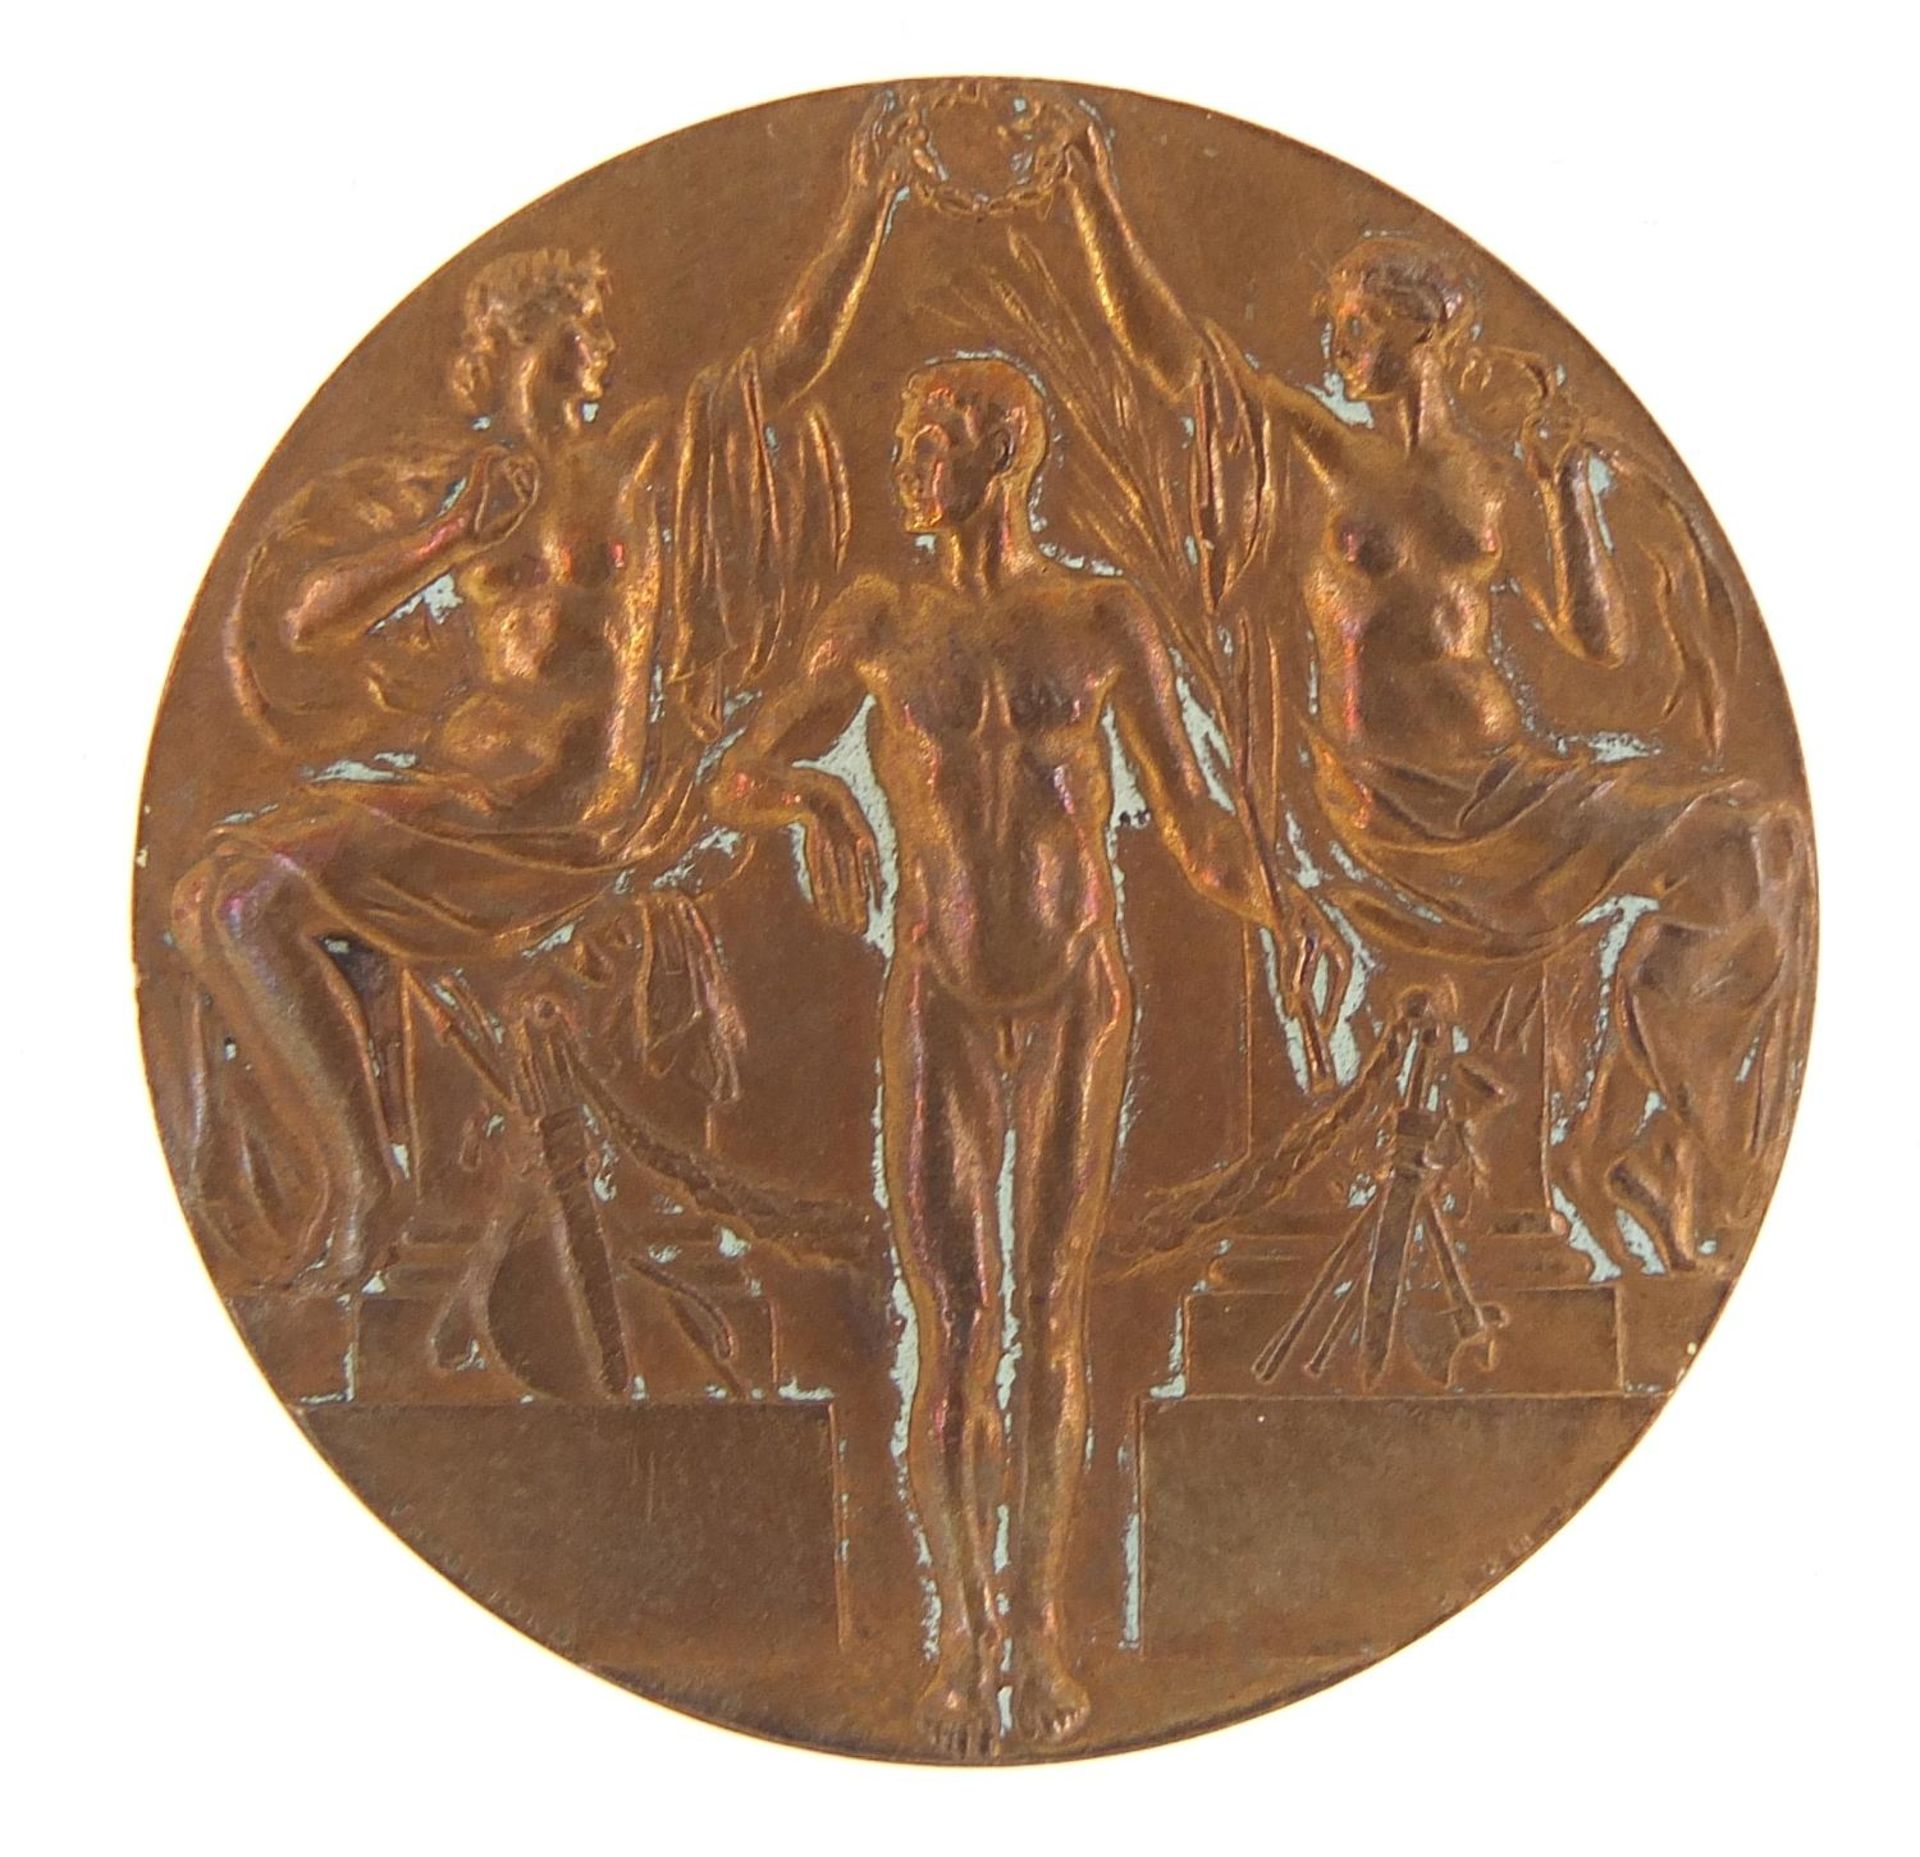 Stockholm 1912 Olympic Games bronze medal, previously owned by George Nicol, 400 metre athlete for